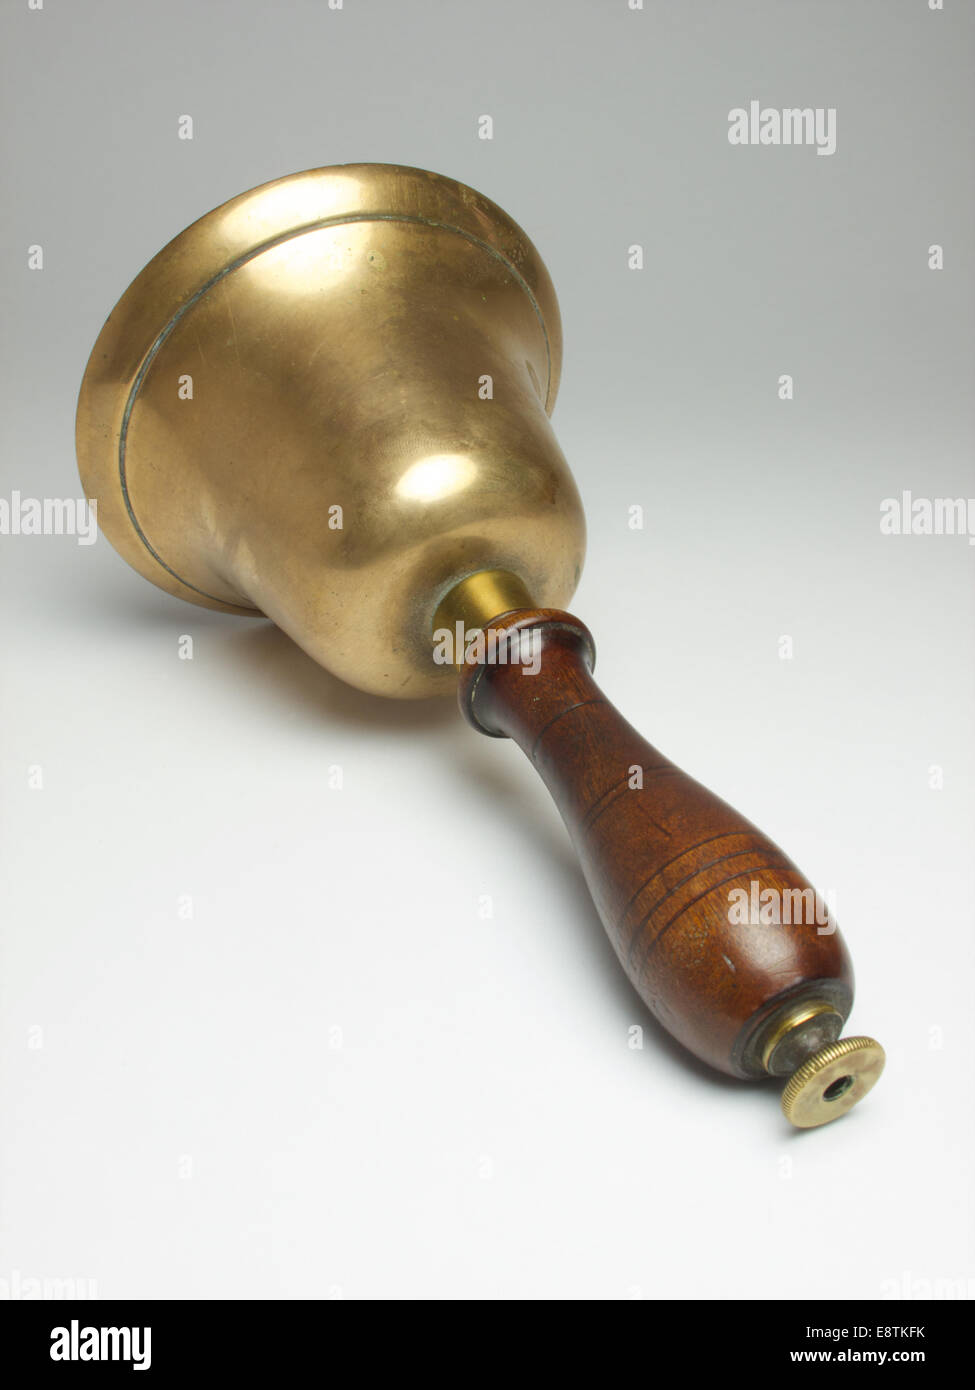 VINTAGE SMALL BELL WITH WOODEN HANDLE AND BRASS BOTTOM